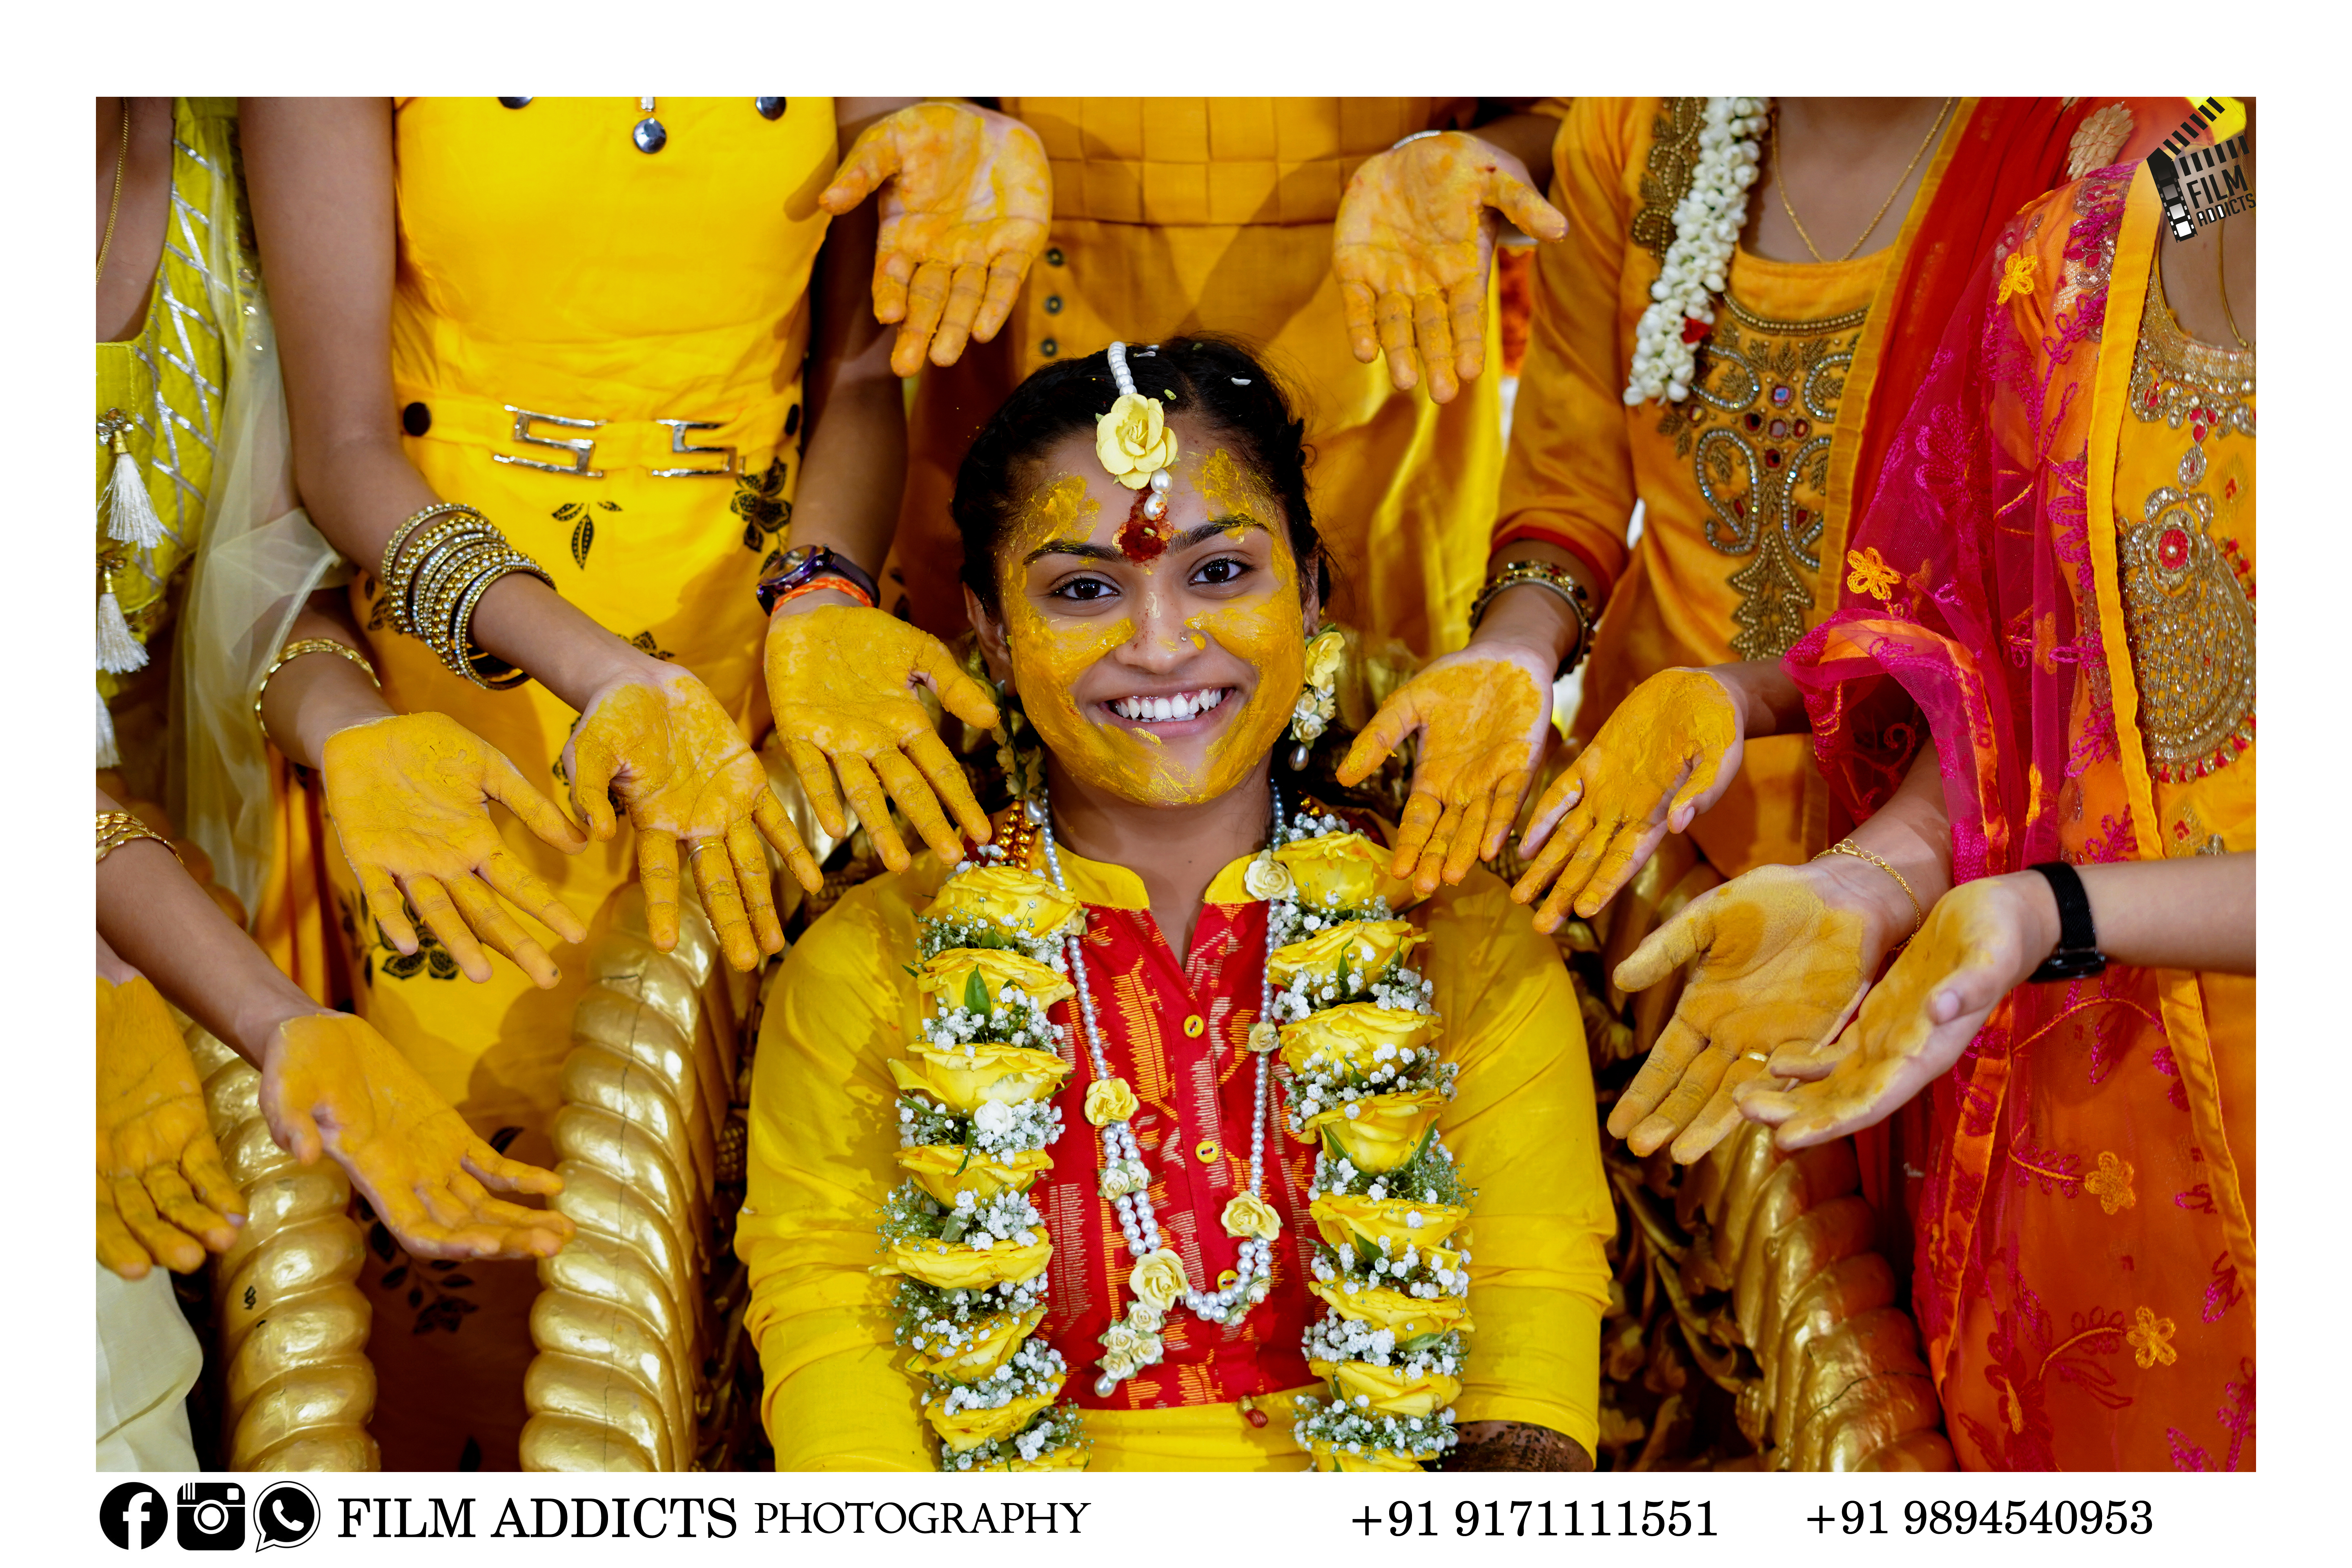 best-candid-photographers-in-Karaikudi,Candid-photography-in-Karaikudi,best-wedding -photography-in-Karaikudi,Best-candid-photography-in-Karaikudi,Best-candid-photographer,candid-photographer-in-Karaikudi,drone-photographer-in-Karaikudi,helicam-photographer-in-Karaikudi,candid-wedding-photographers-in-Karaikudi,photographers-in-Karaikudi,professional-wedding-photographers-in-Karaikudi,top-wedding-filmmakers-in-Karaikudi,wedding-cinematographers-in-Karaikudi,wedding-cinimatography-in-Karaikudi,wedding-photographers-in-Karaikudi,wedding-teaser-in-Karaikudi,asian-wedding-photography-in-Karaikudi,best-candid-photographers-in-Karaikudi,best-candid-videographers-in-Karaikudi,best-photographers-in-Karaikudi,best-wedding-photographers-in-Karaikudi,best-nadar-wedding-photography-in-Karaikudi,candid-photographers-in-Karaikudi,destination-wedding-photographers-in-Karaikudi,fashion-photographers-in-Karaikudi, Karaikudi-famous-stage-decorations